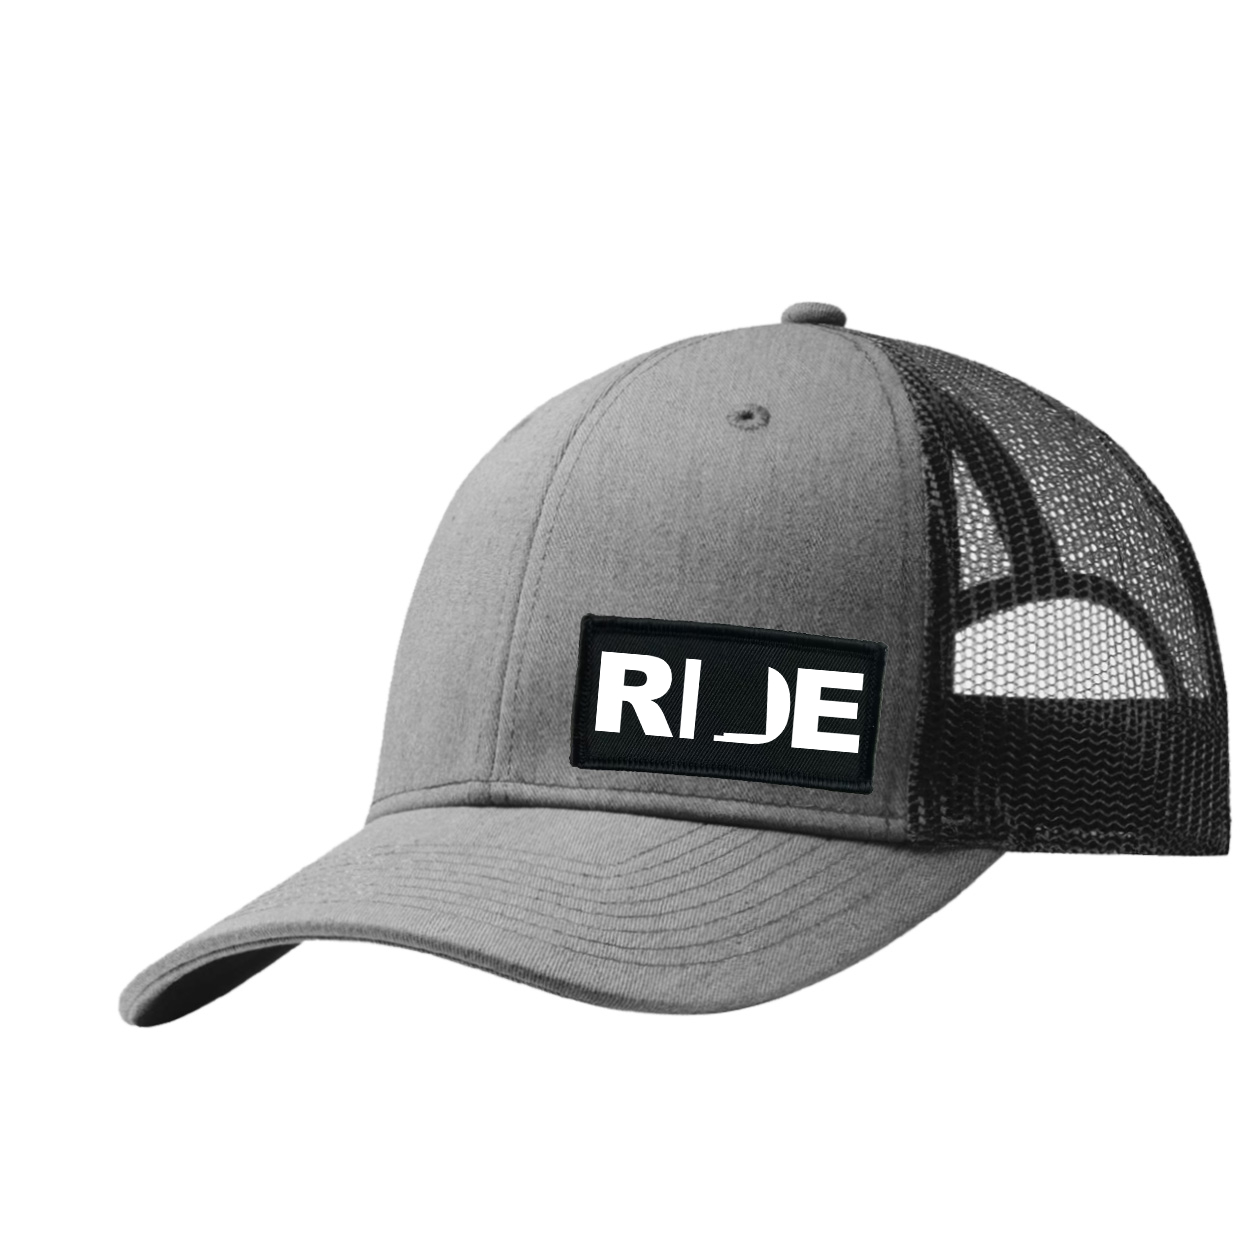 Ride New Mexico Night Out Woven Patch Snapback Trucker Hat Heather Gray/Black (White Logo)